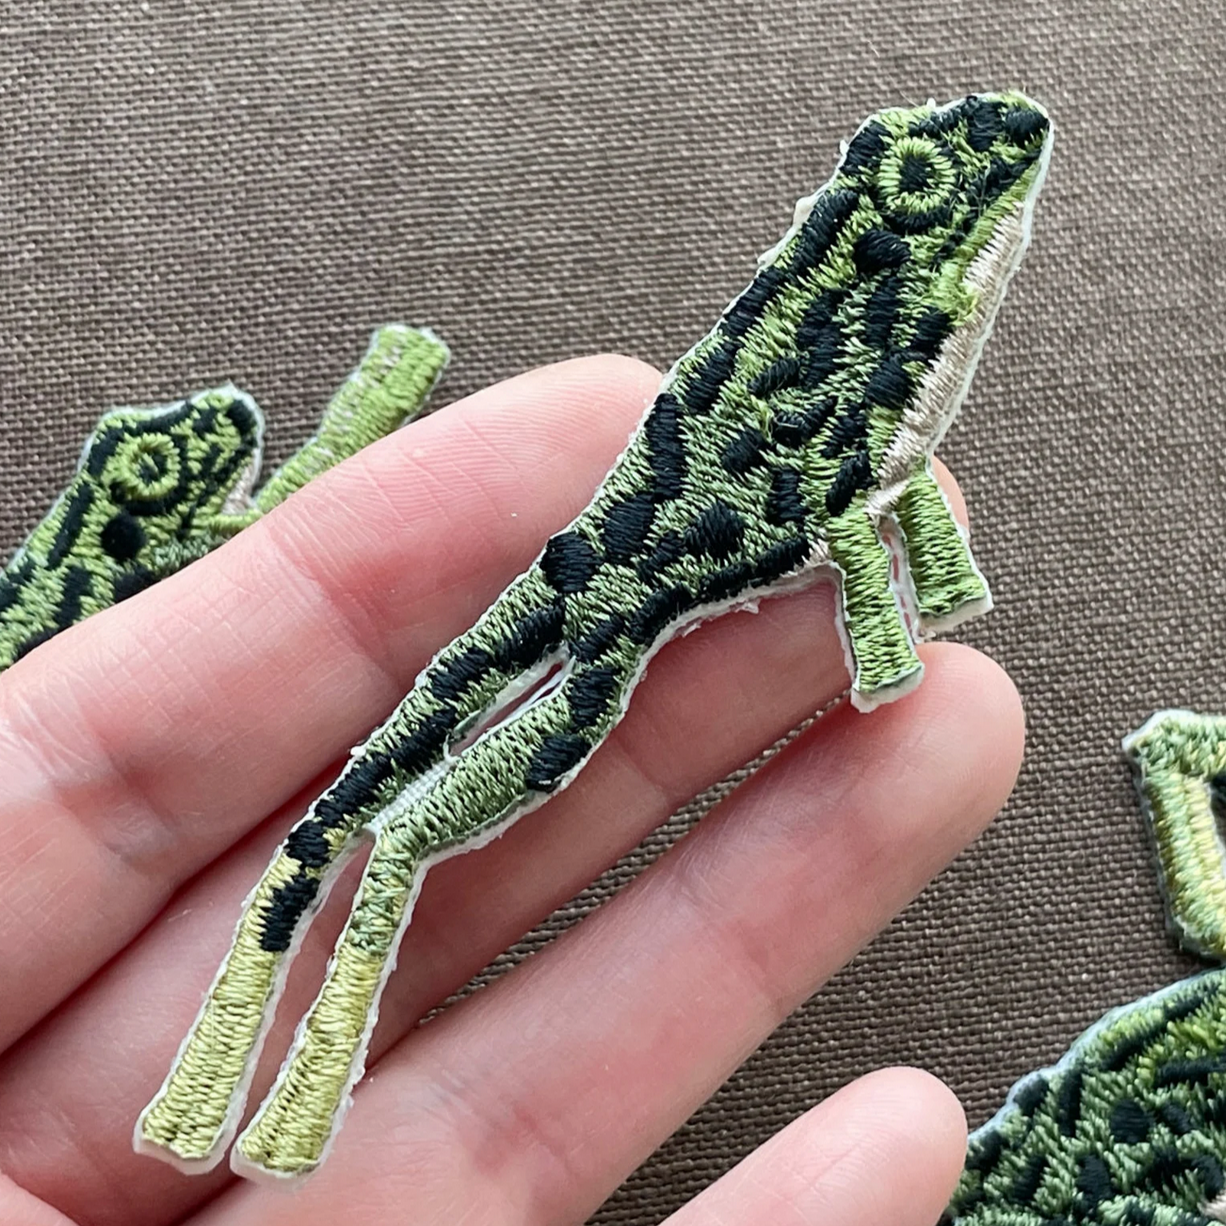 IRON ON PATACHES - FROG PATCH